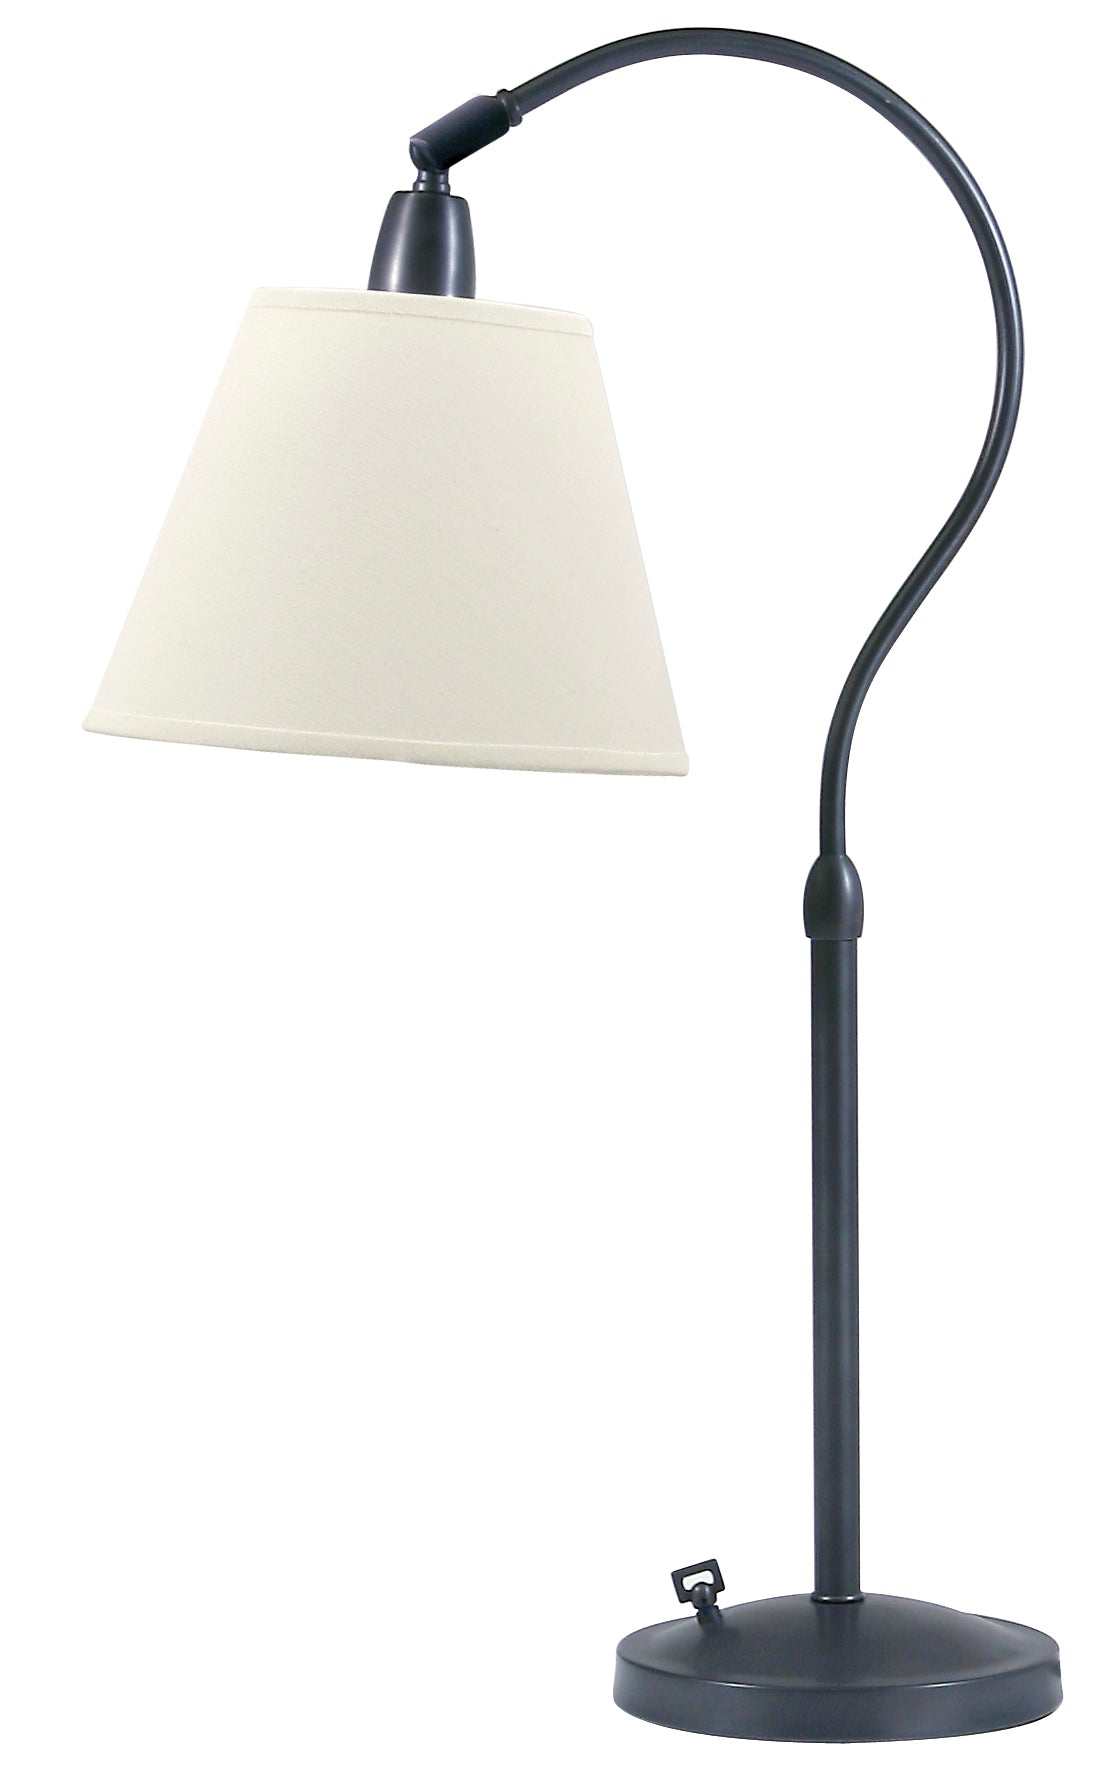 House of Troy Hyde Park Table Lamp Oil Rubbed Bronze w/White Linen Shade HP750-OB-WL